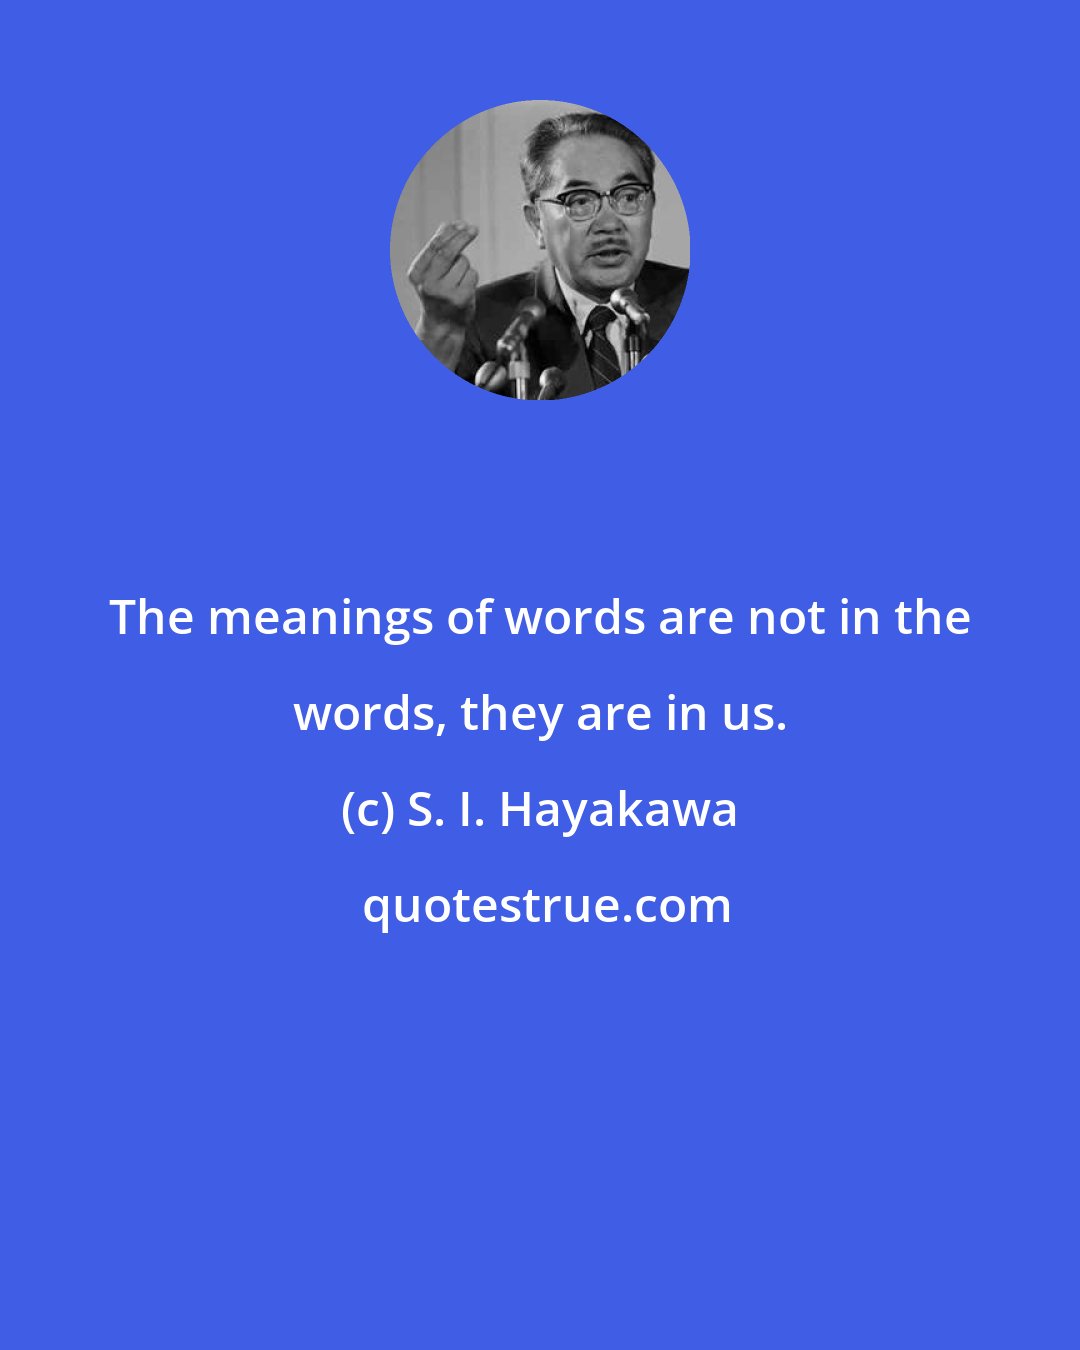 S. I. Hayakawa: The meanings of words are not in the words, they are in us.